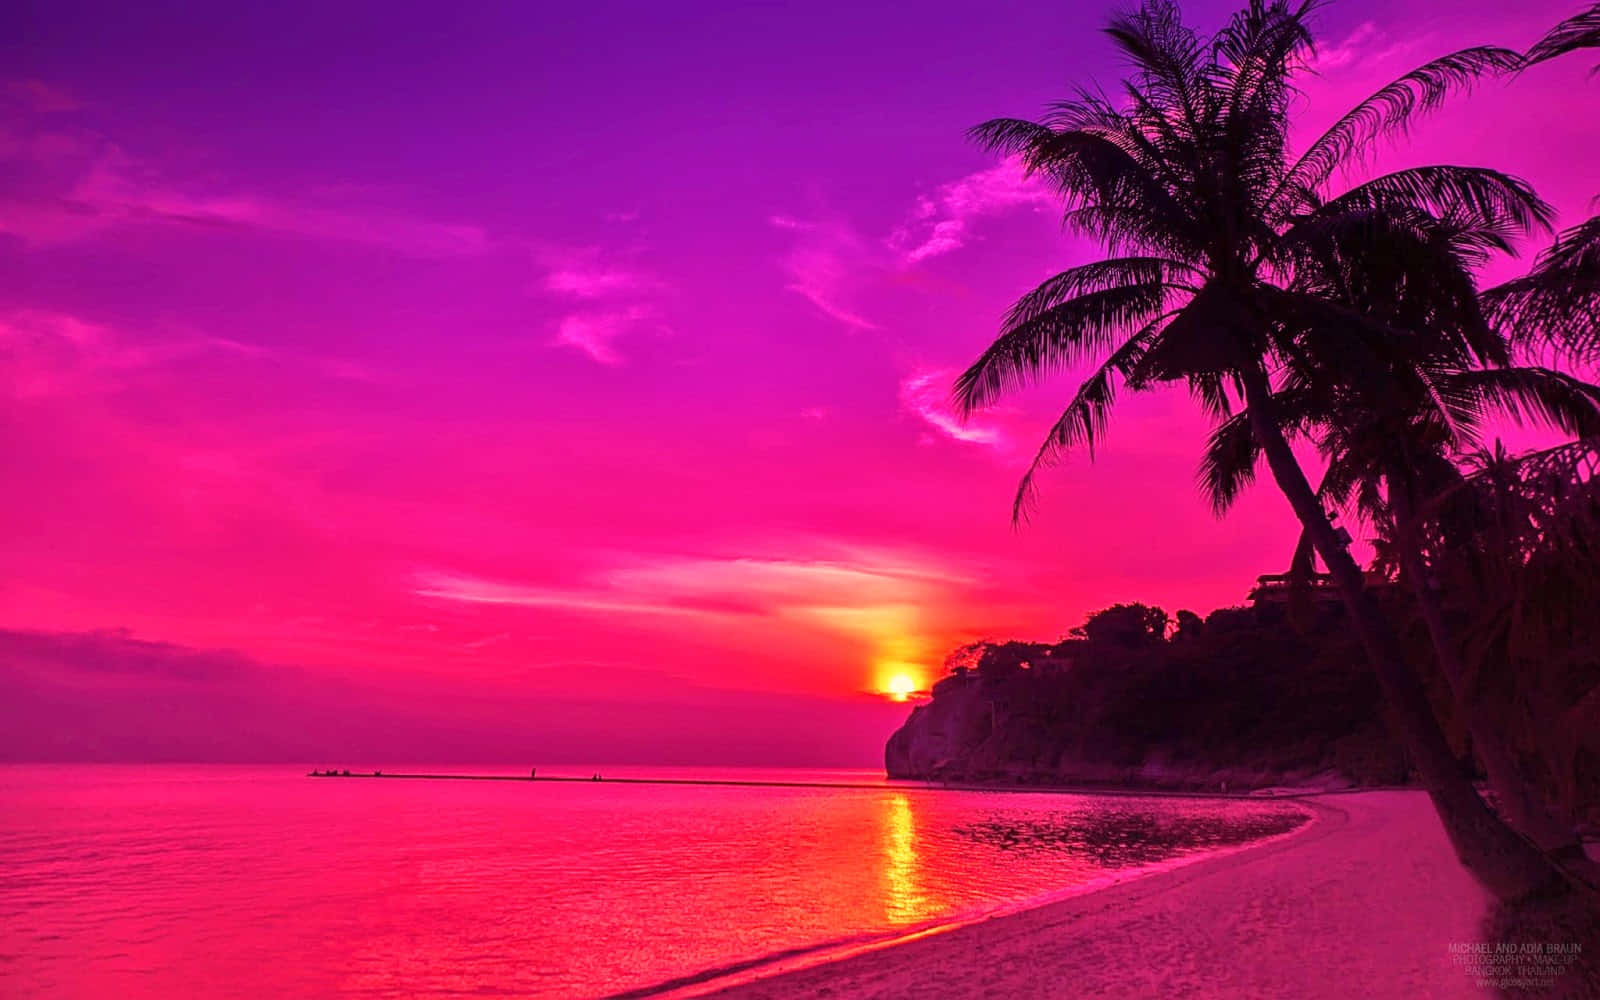 Embrace the beauty and tranquility of a beach sunset